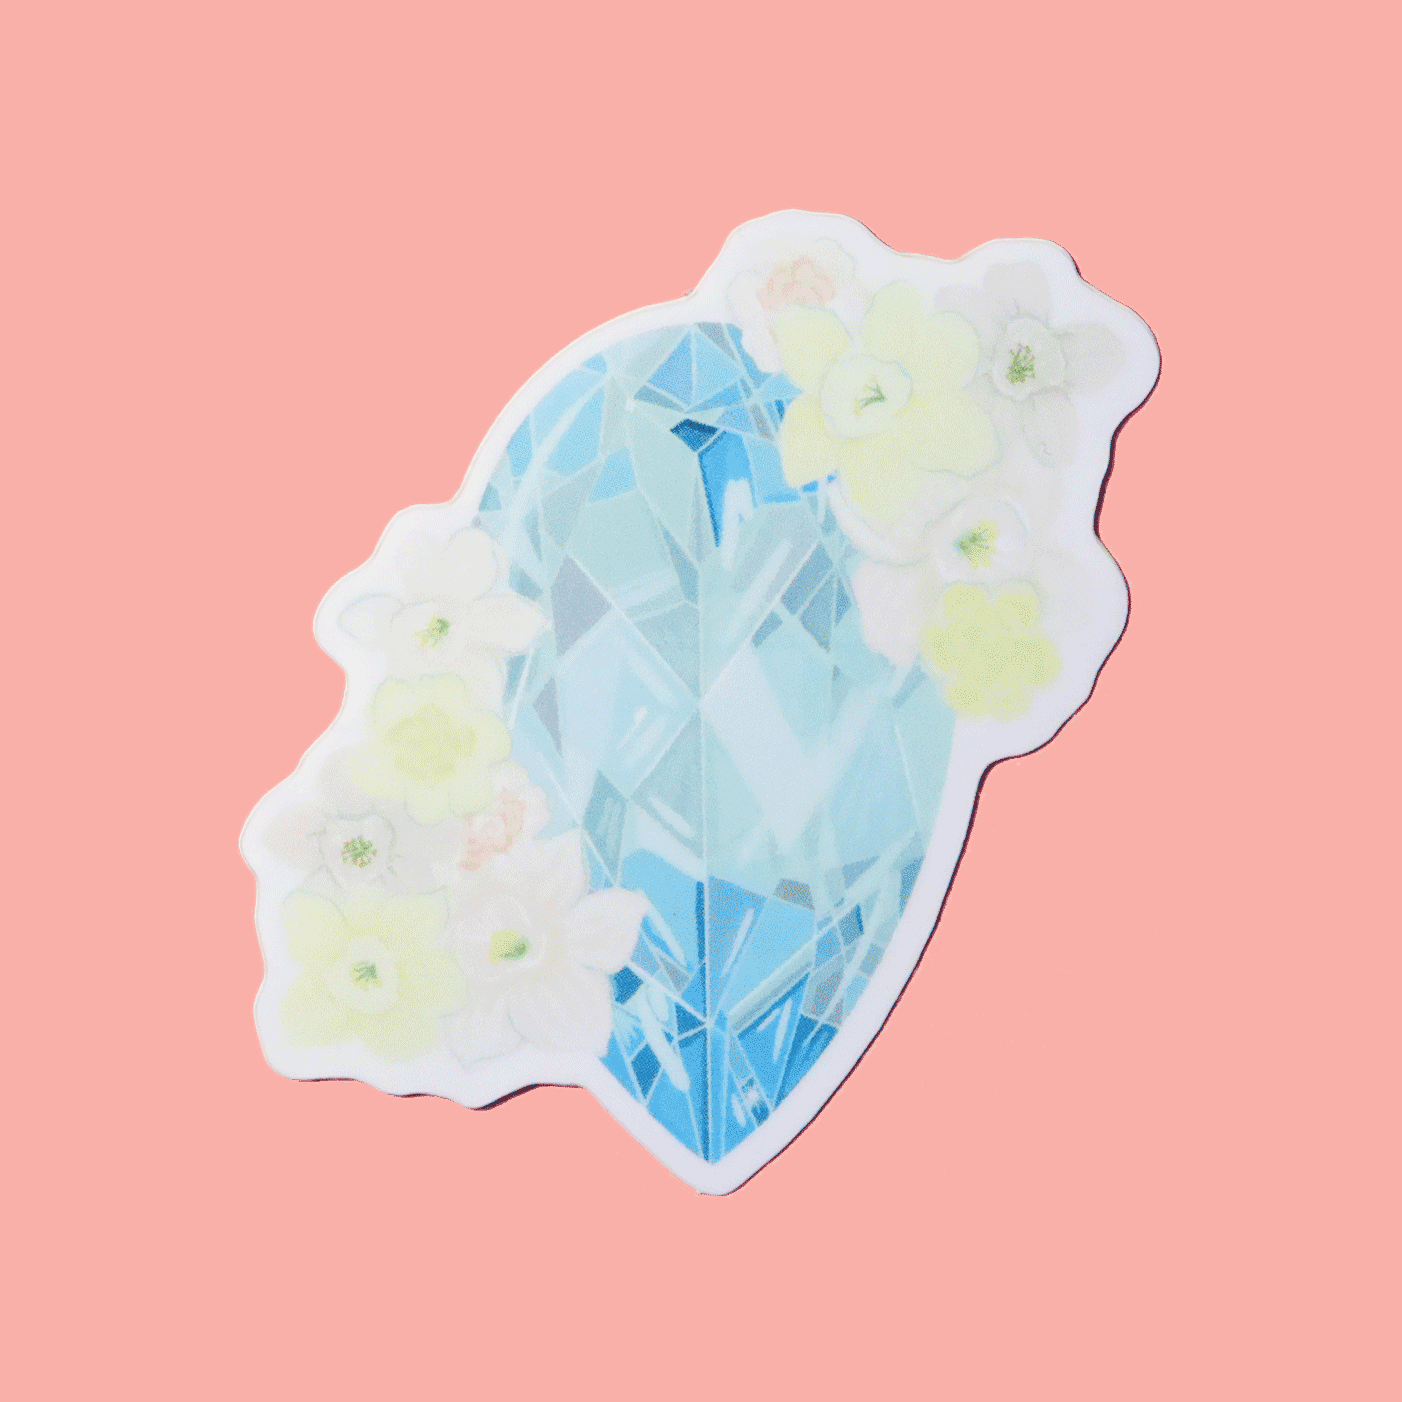 Sticker showcasing an illustrated March birthstone of aquamarine and birth flowers of daffodil and jonquil.